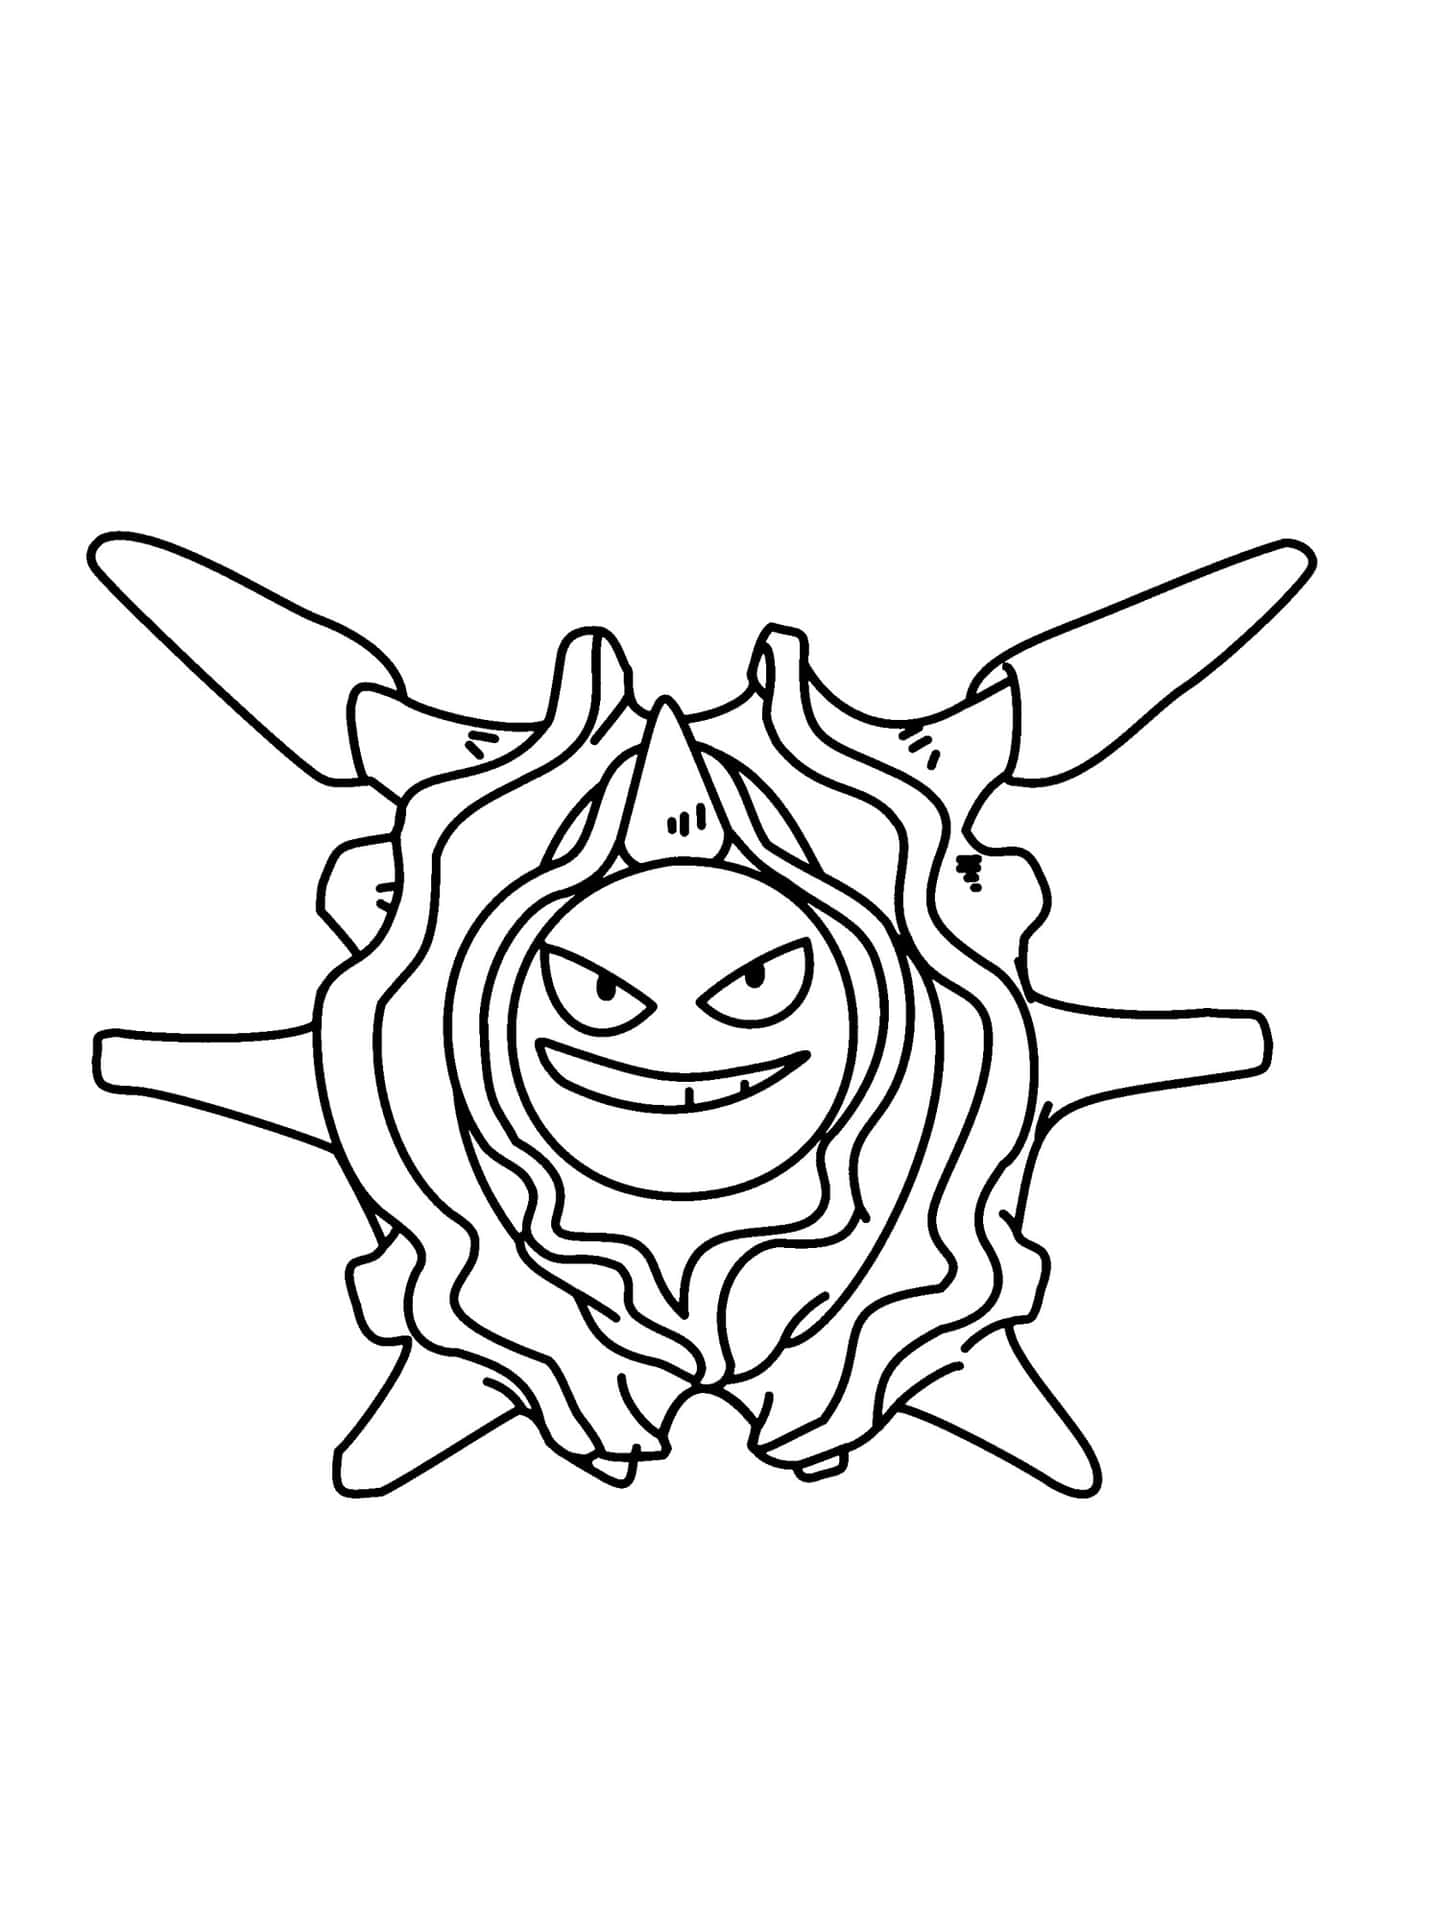 Cloyster Grinning Coloring Page Wallpaper